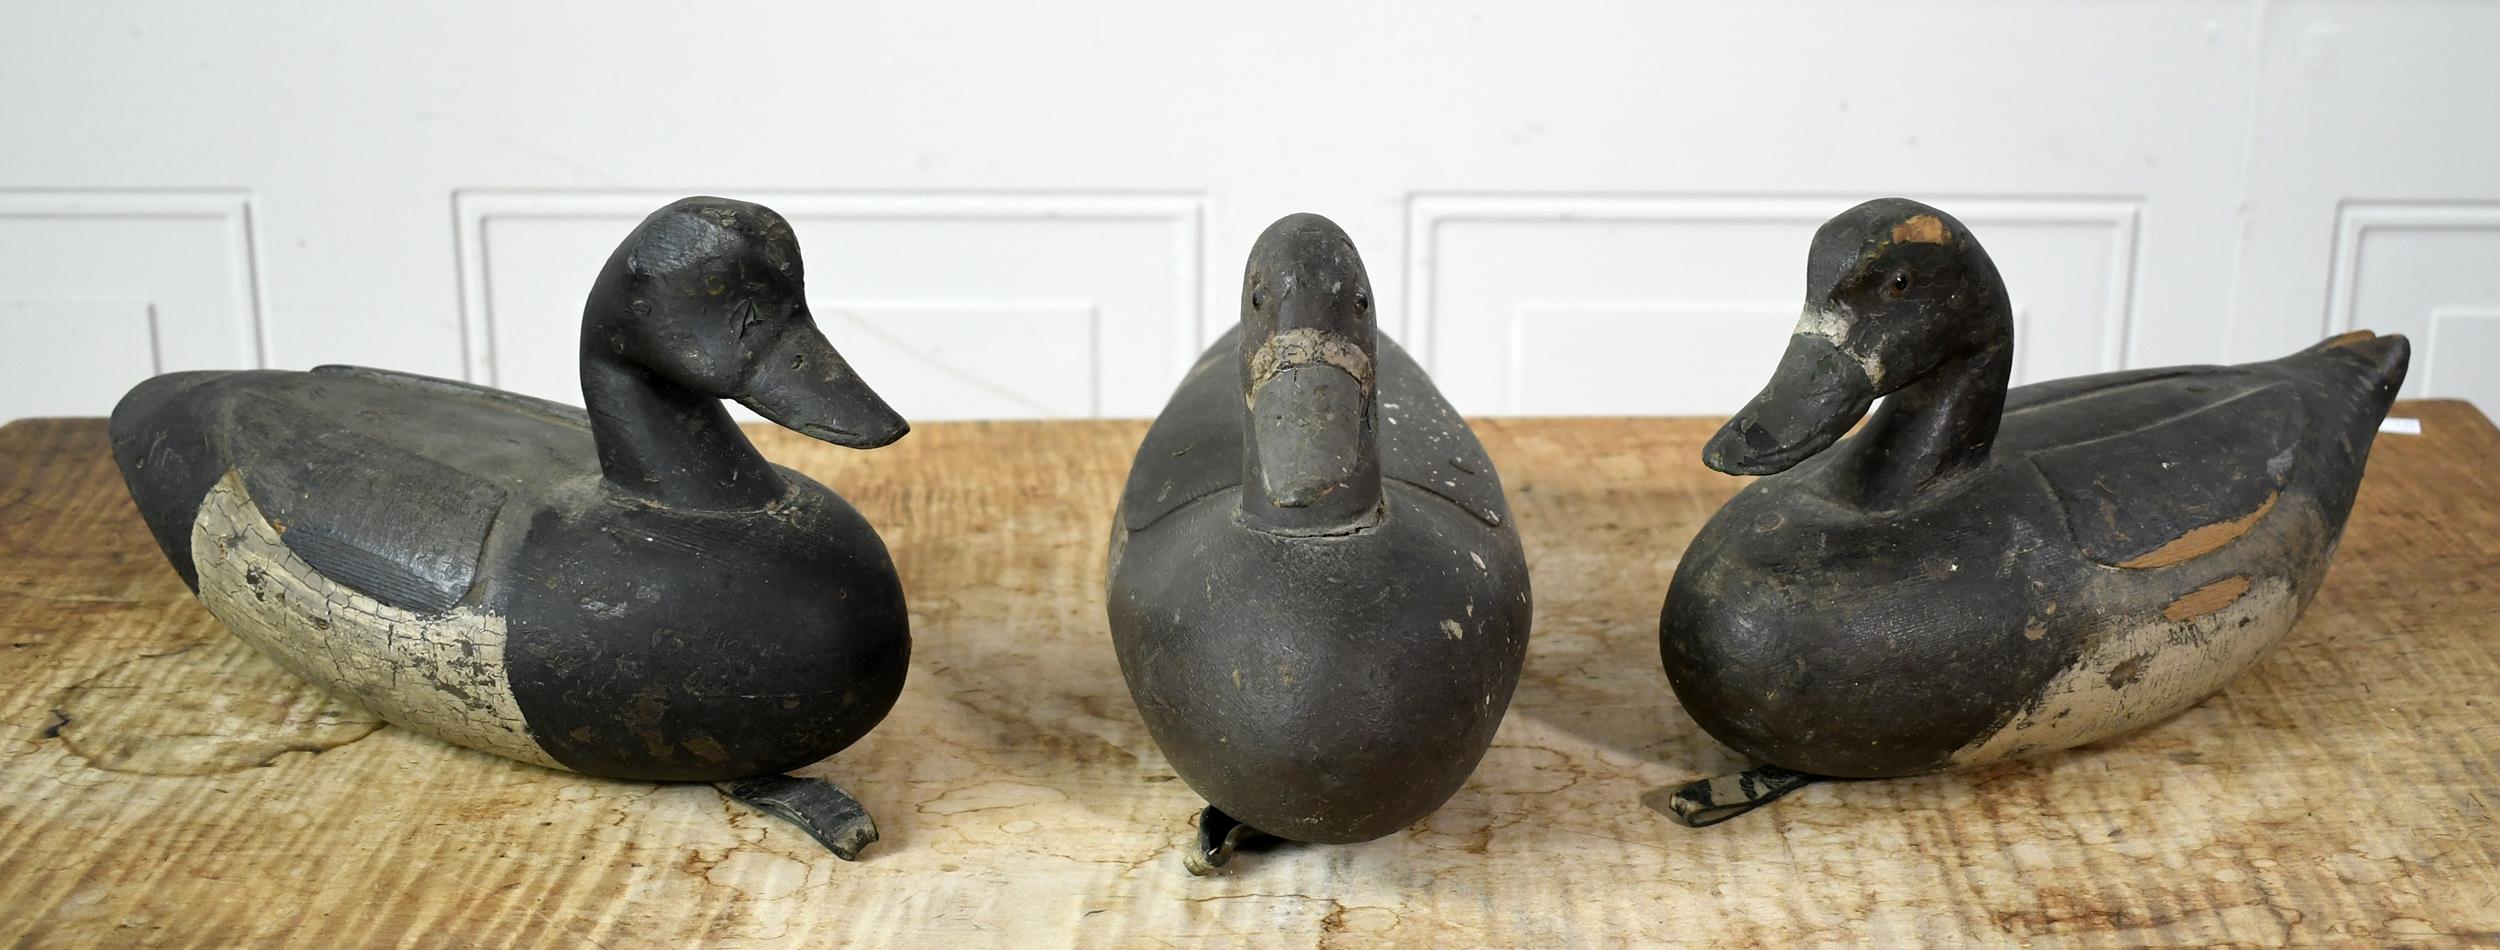 THREE ANTIQUE CARVED WING DUCK DECOYS.